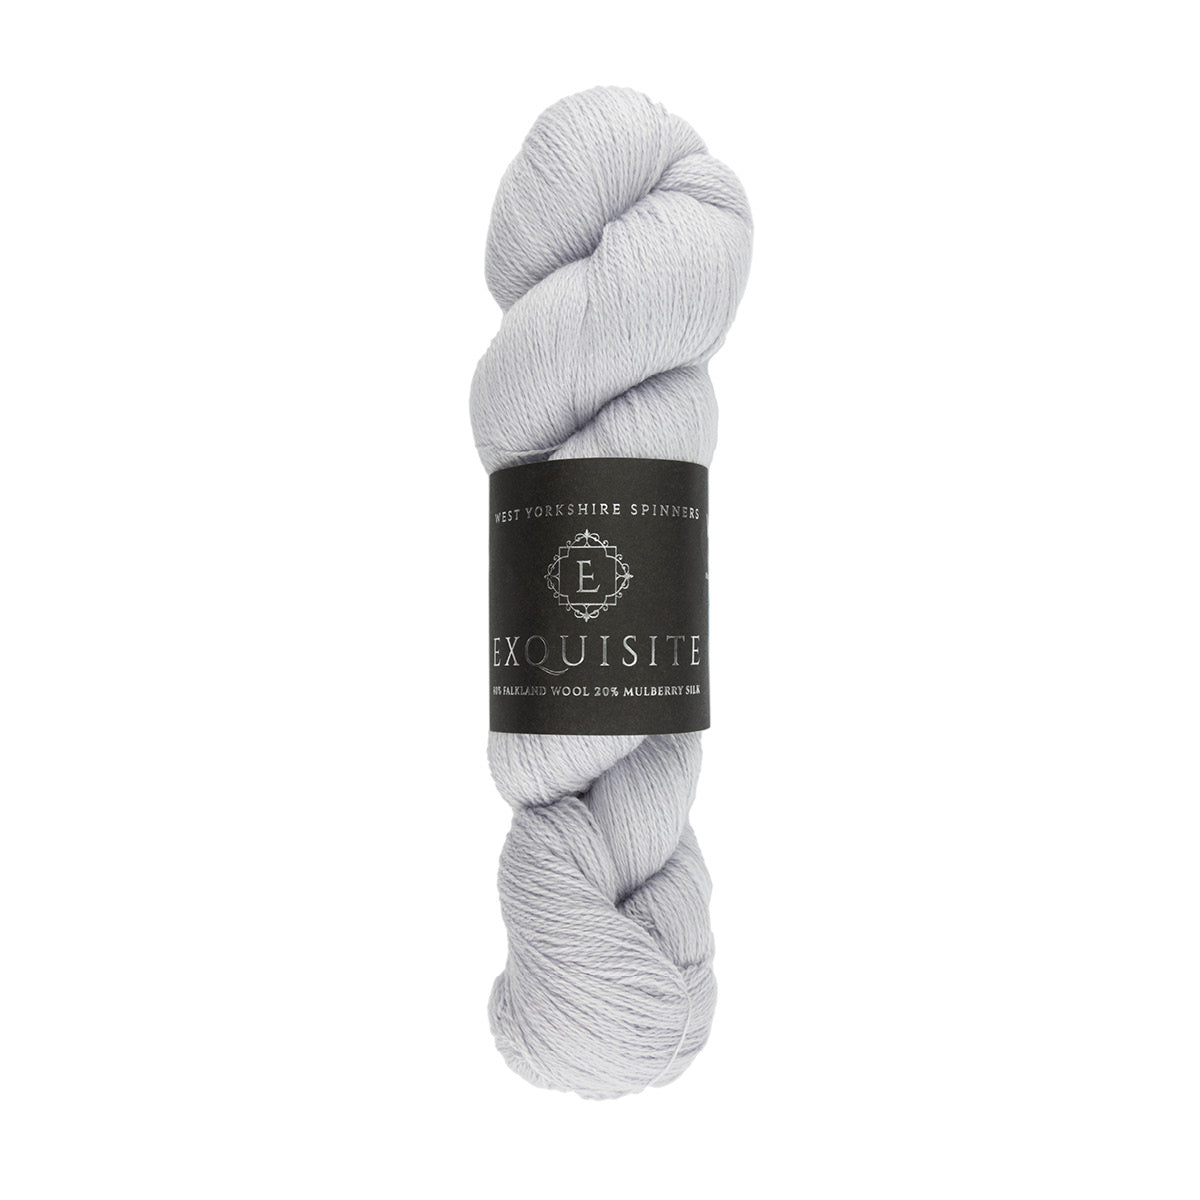 WYS West Yorkshire Spinners Exquisite Lace hank or skein in light silvery grey shade florence 258